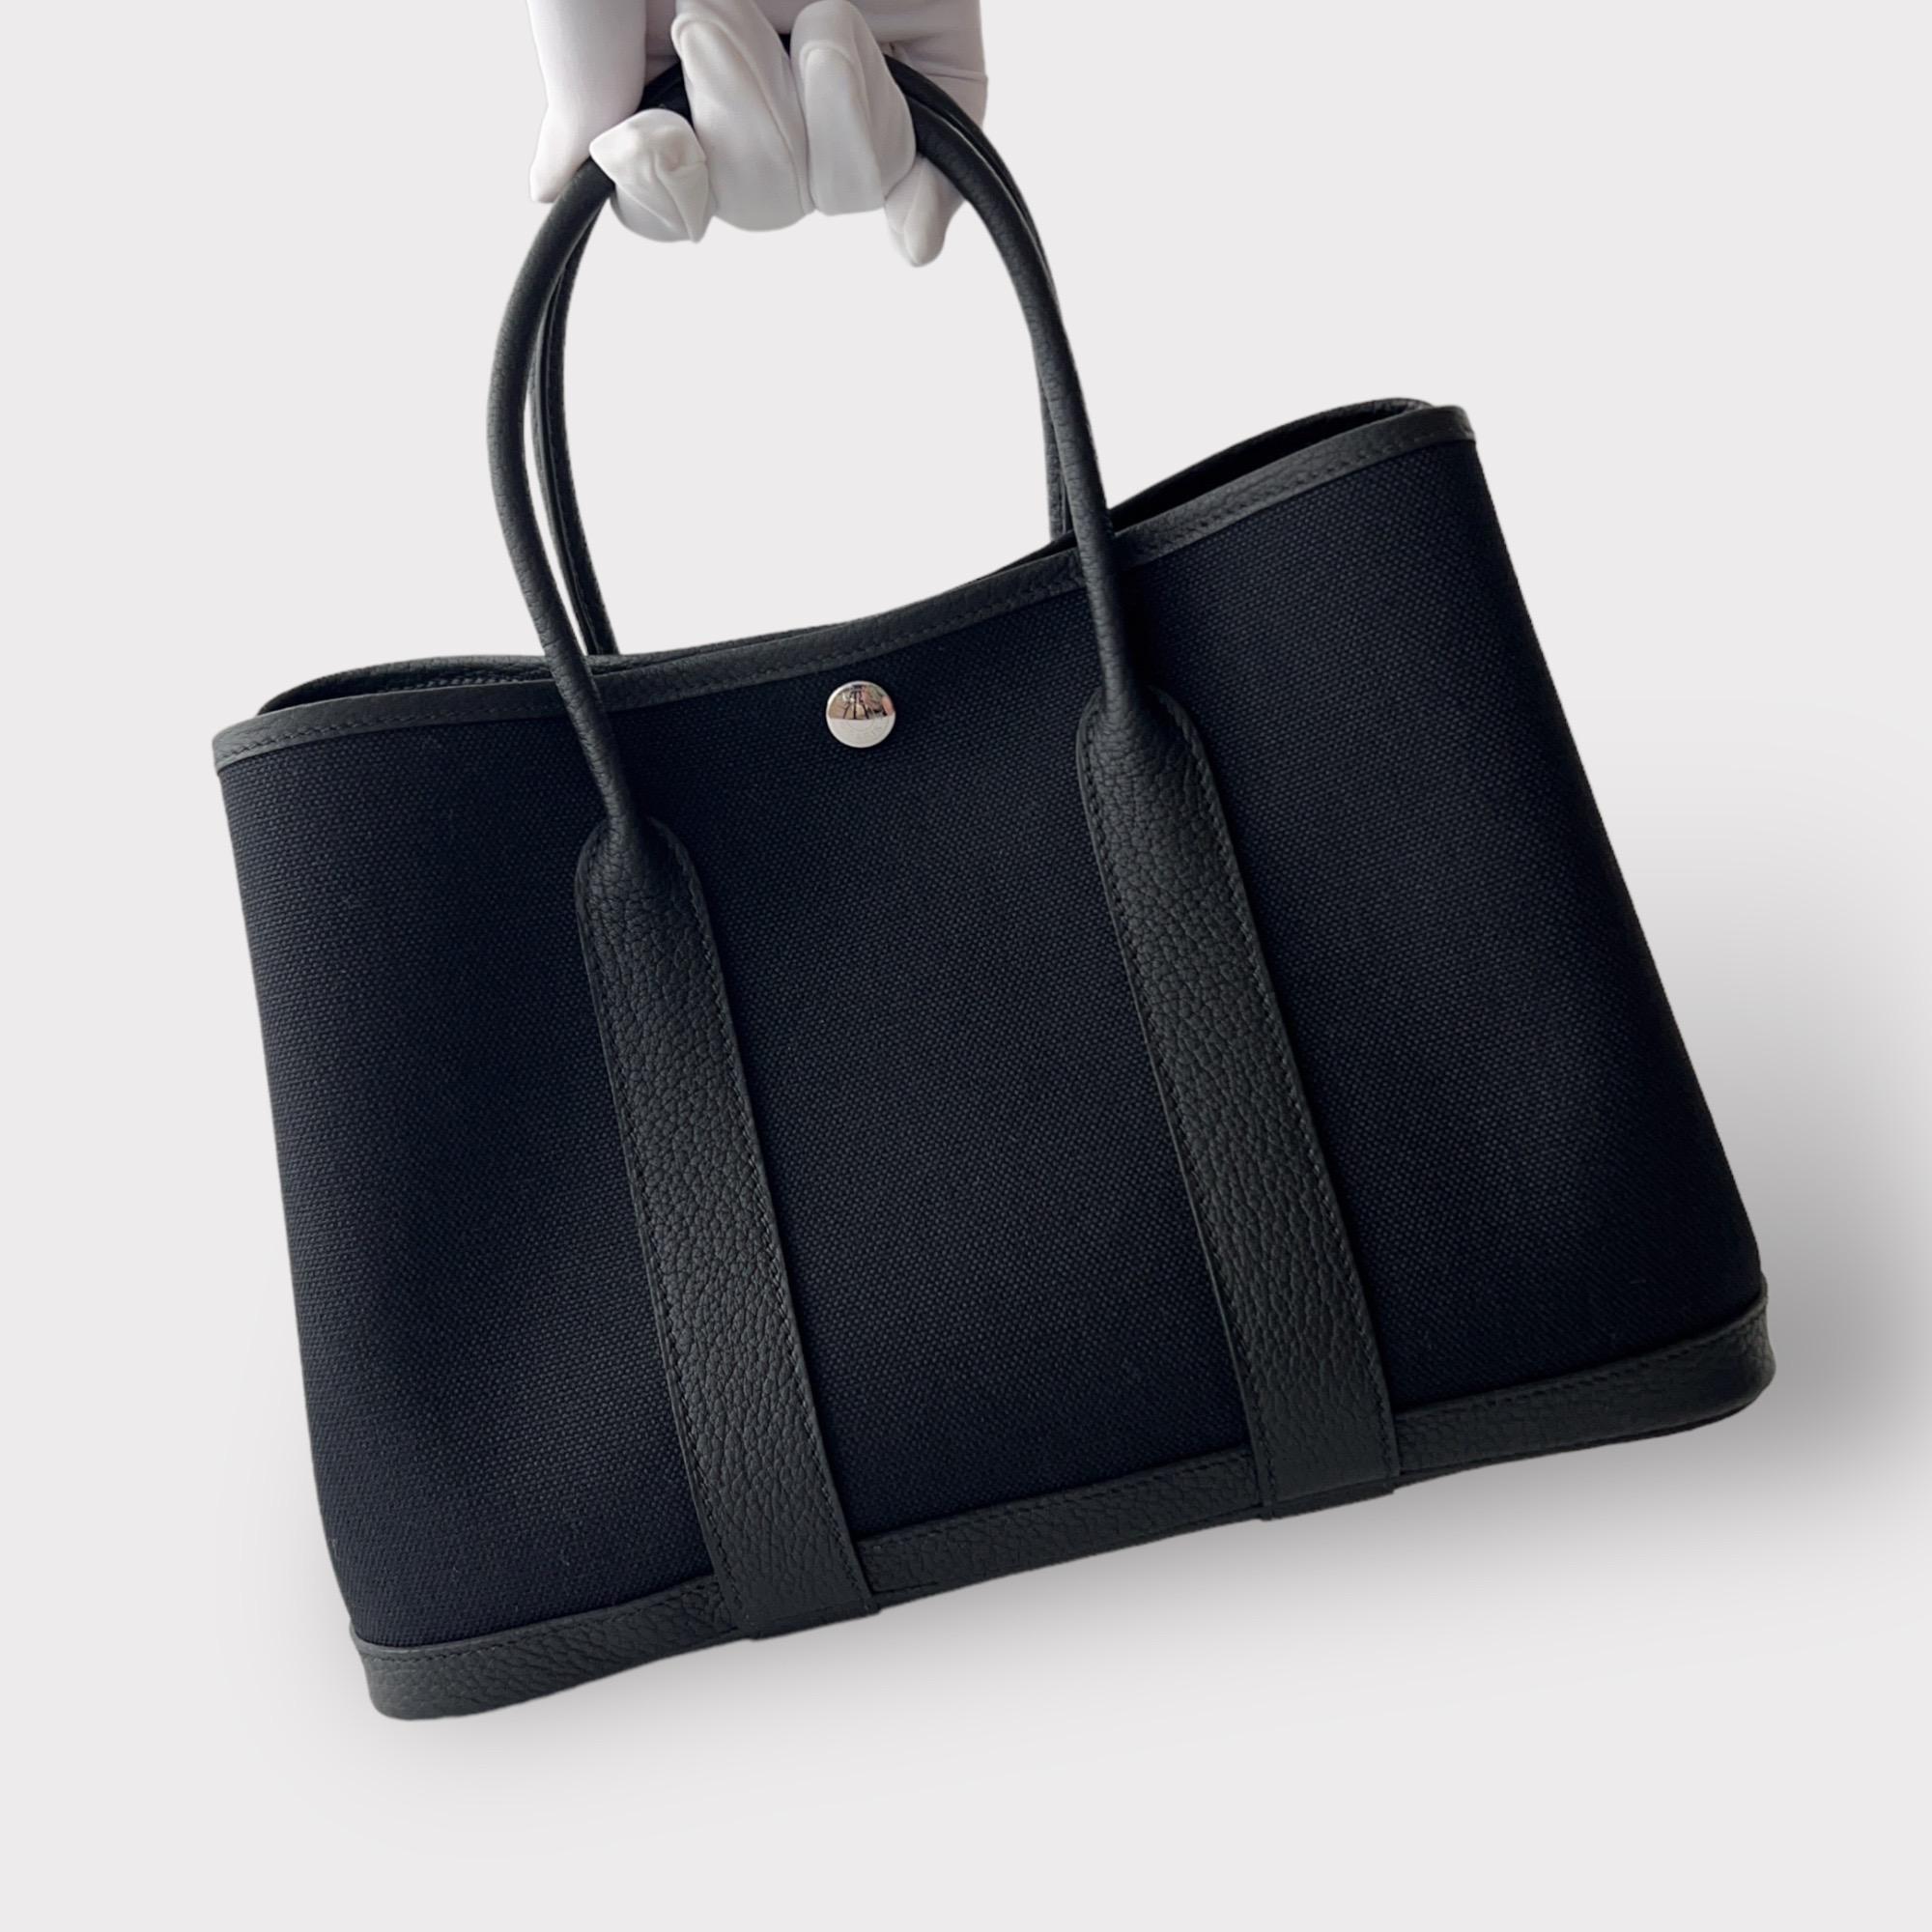 Shop this elegant Hermès Garden Party 30 in the classic colour of Black. This Hermes garden party comes in twill 'H' canvas with leather detailing. The garden party is the perfect everyday tote being very versatile and lightweight to carry. 

Brand: